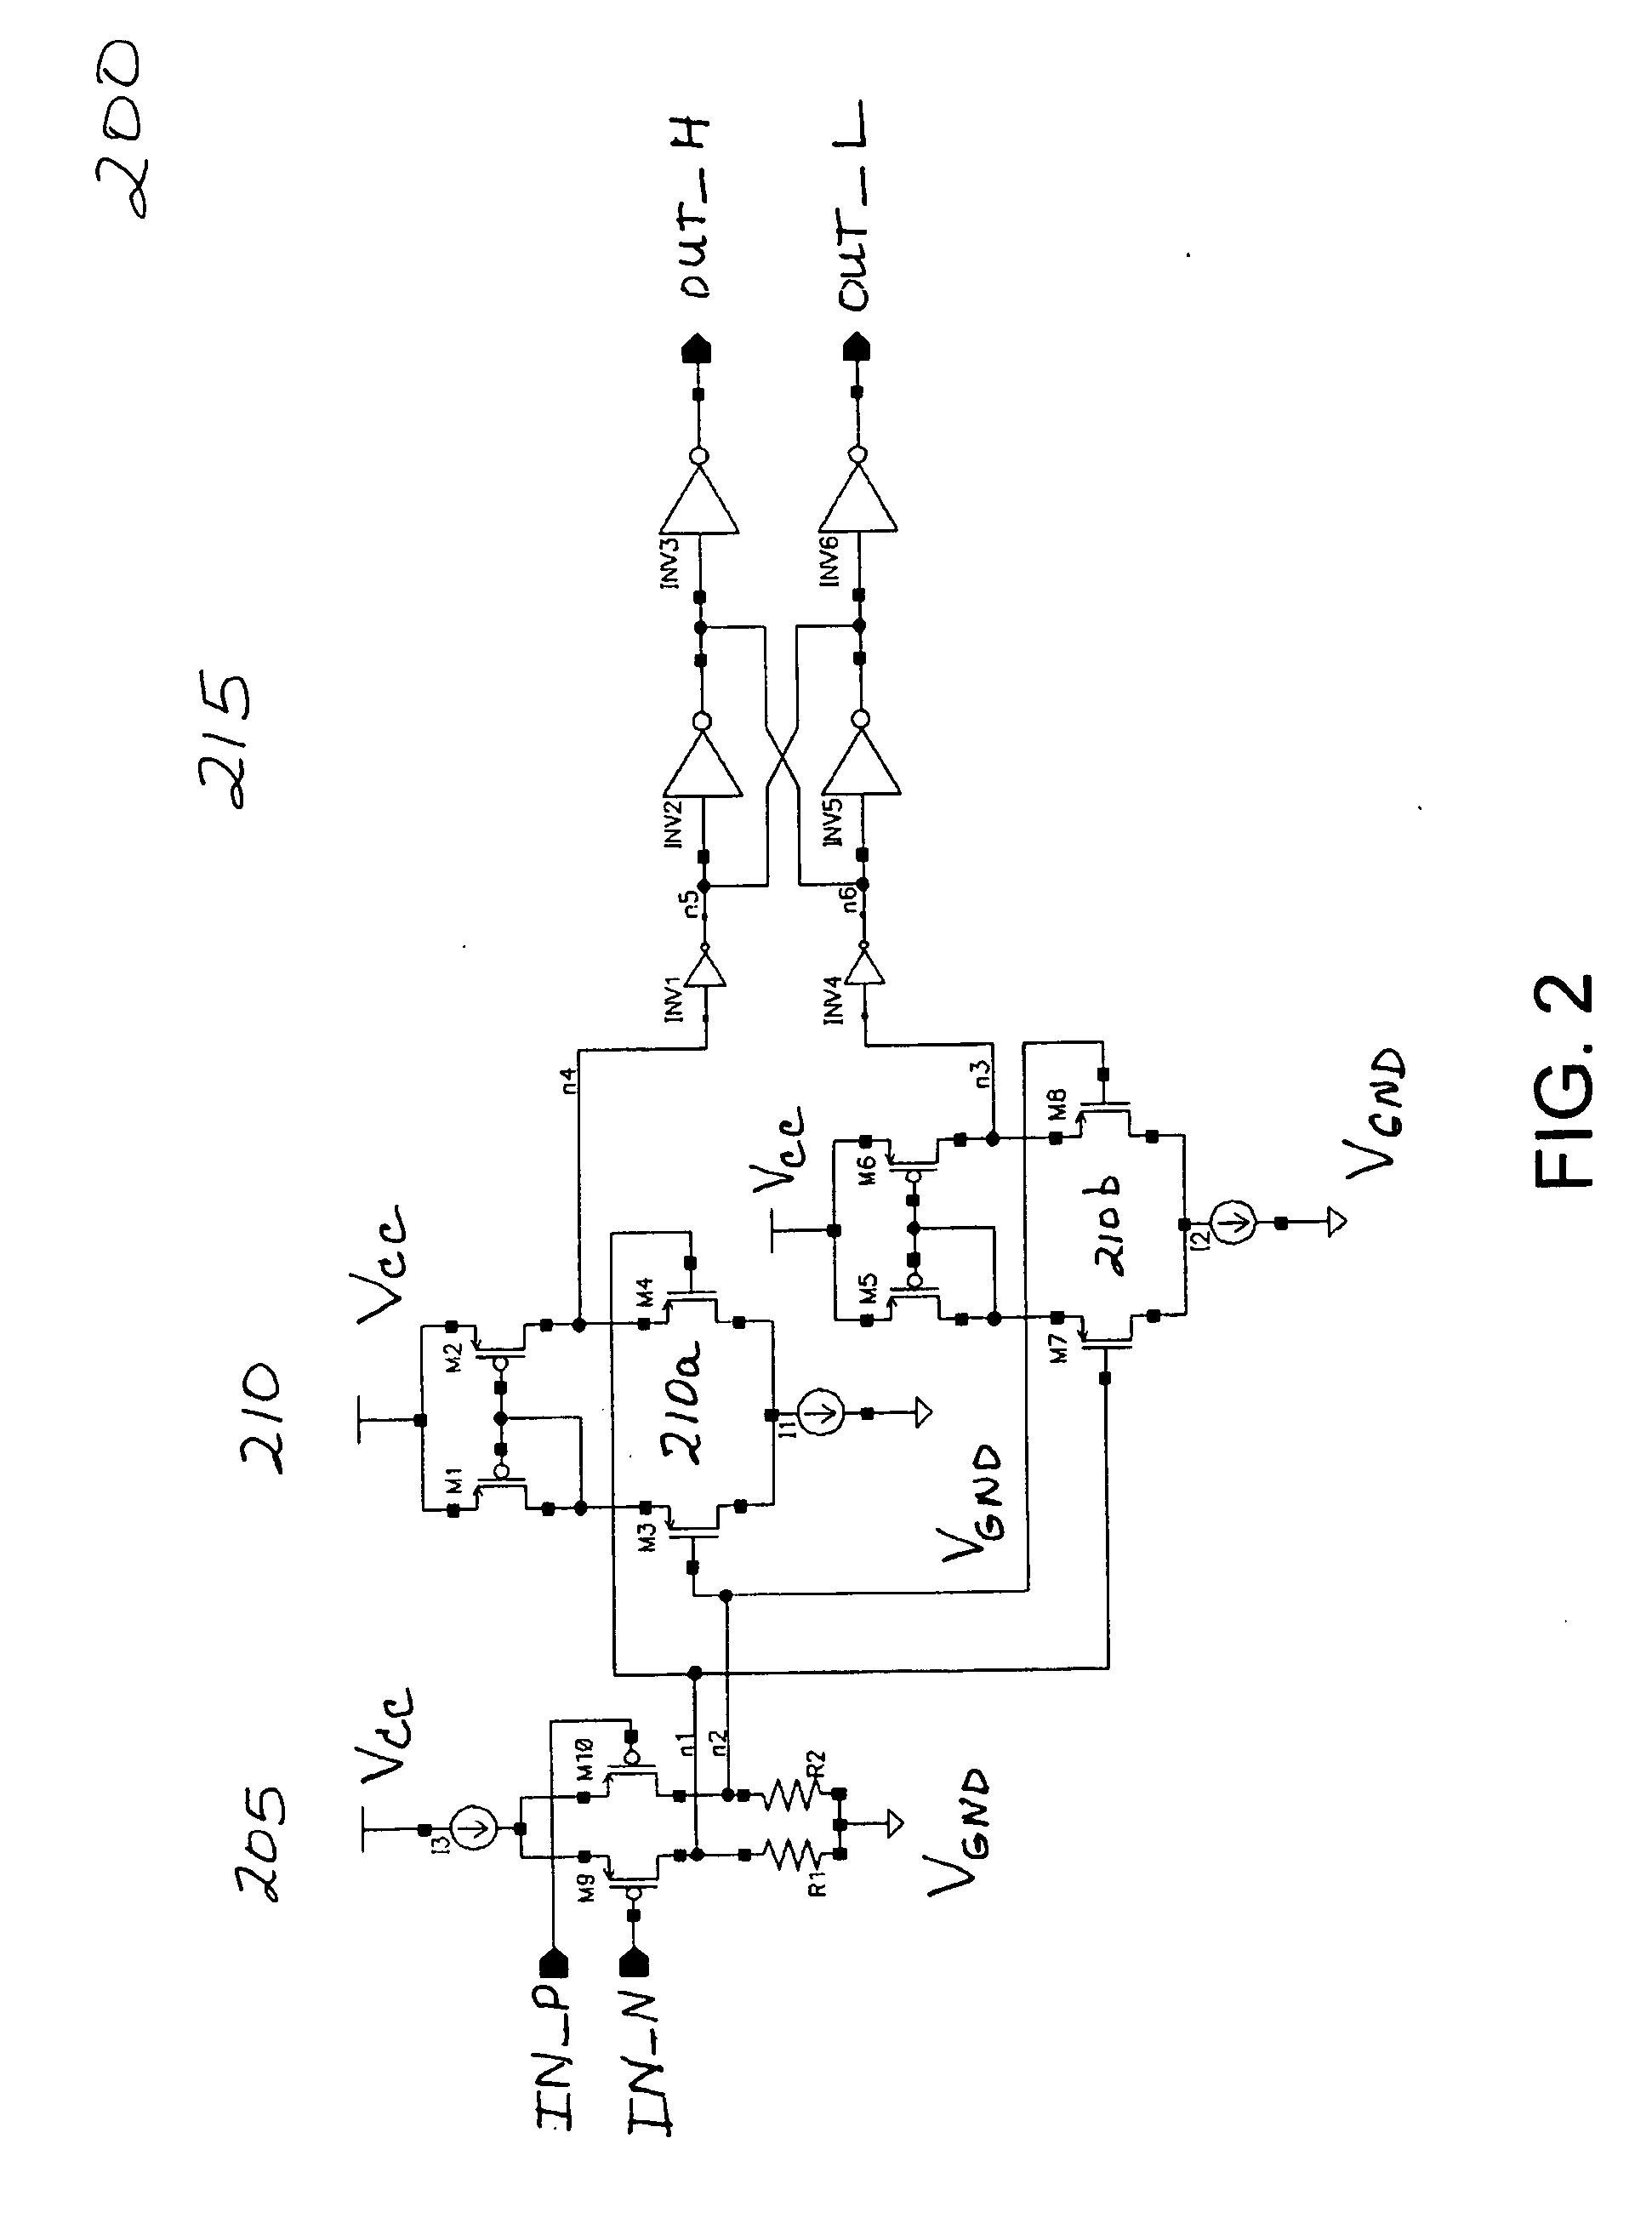 Method and circuit for translating a differential signal to complmentary CMOS levels